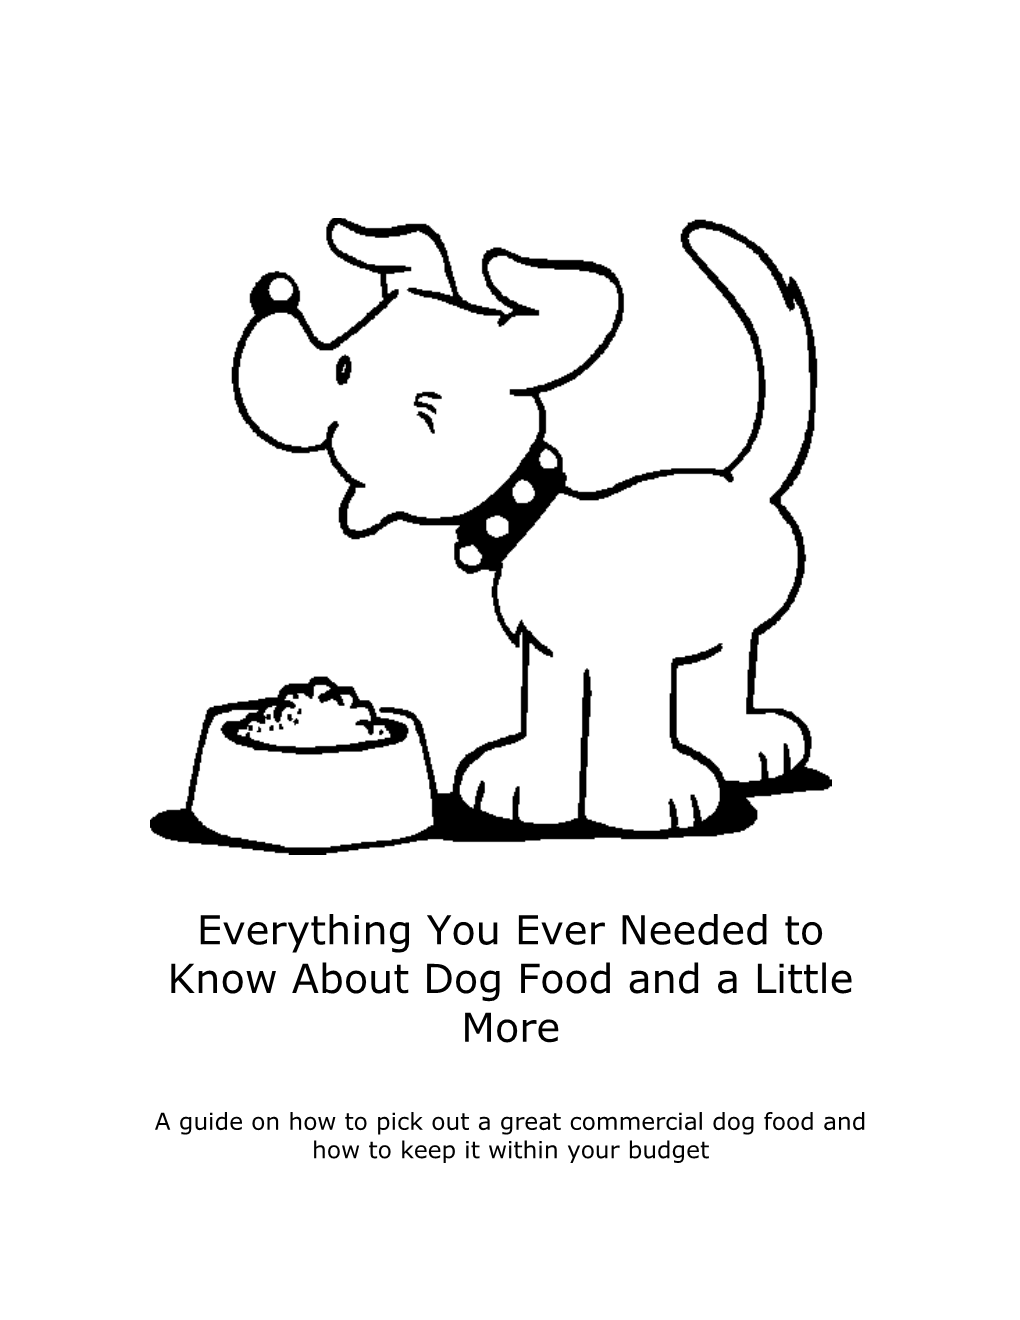 Everything You Ever Needed to Know About Dog Food and a Little More